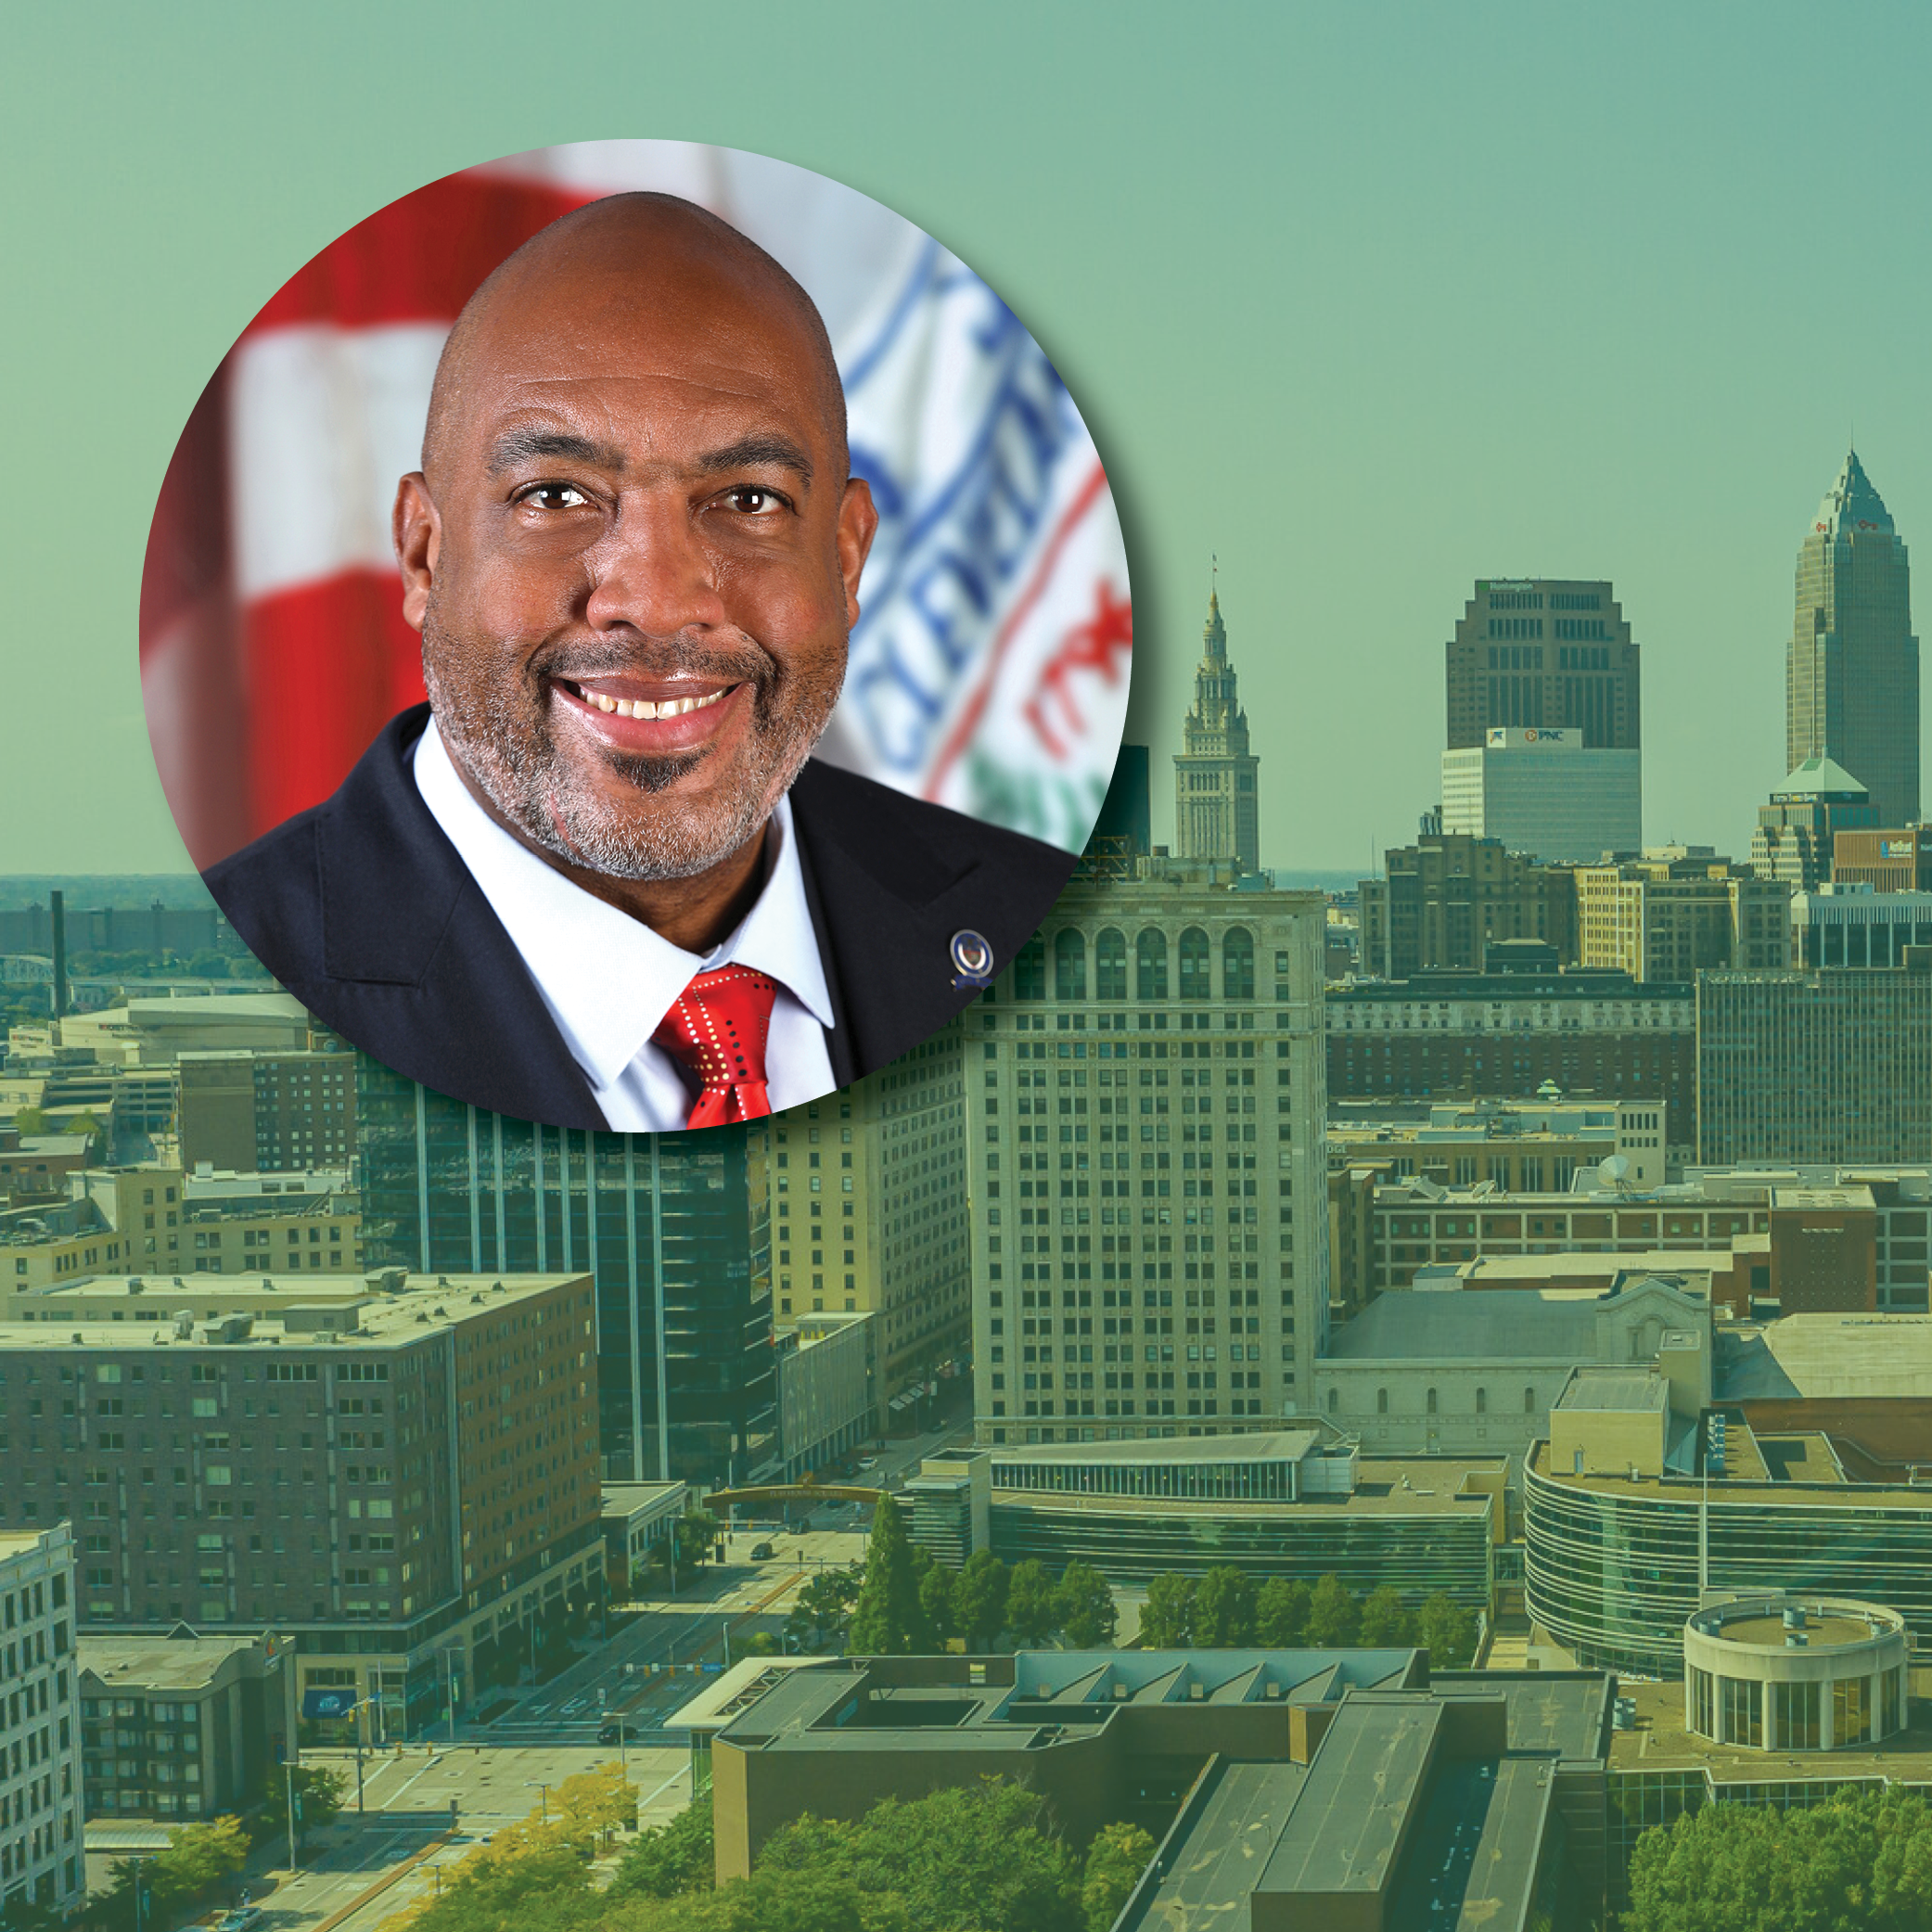 Levin Morning Briefing | Featuring Blaine A. Griffin, Council President, City of Cleveland, On the Importance of Public Service